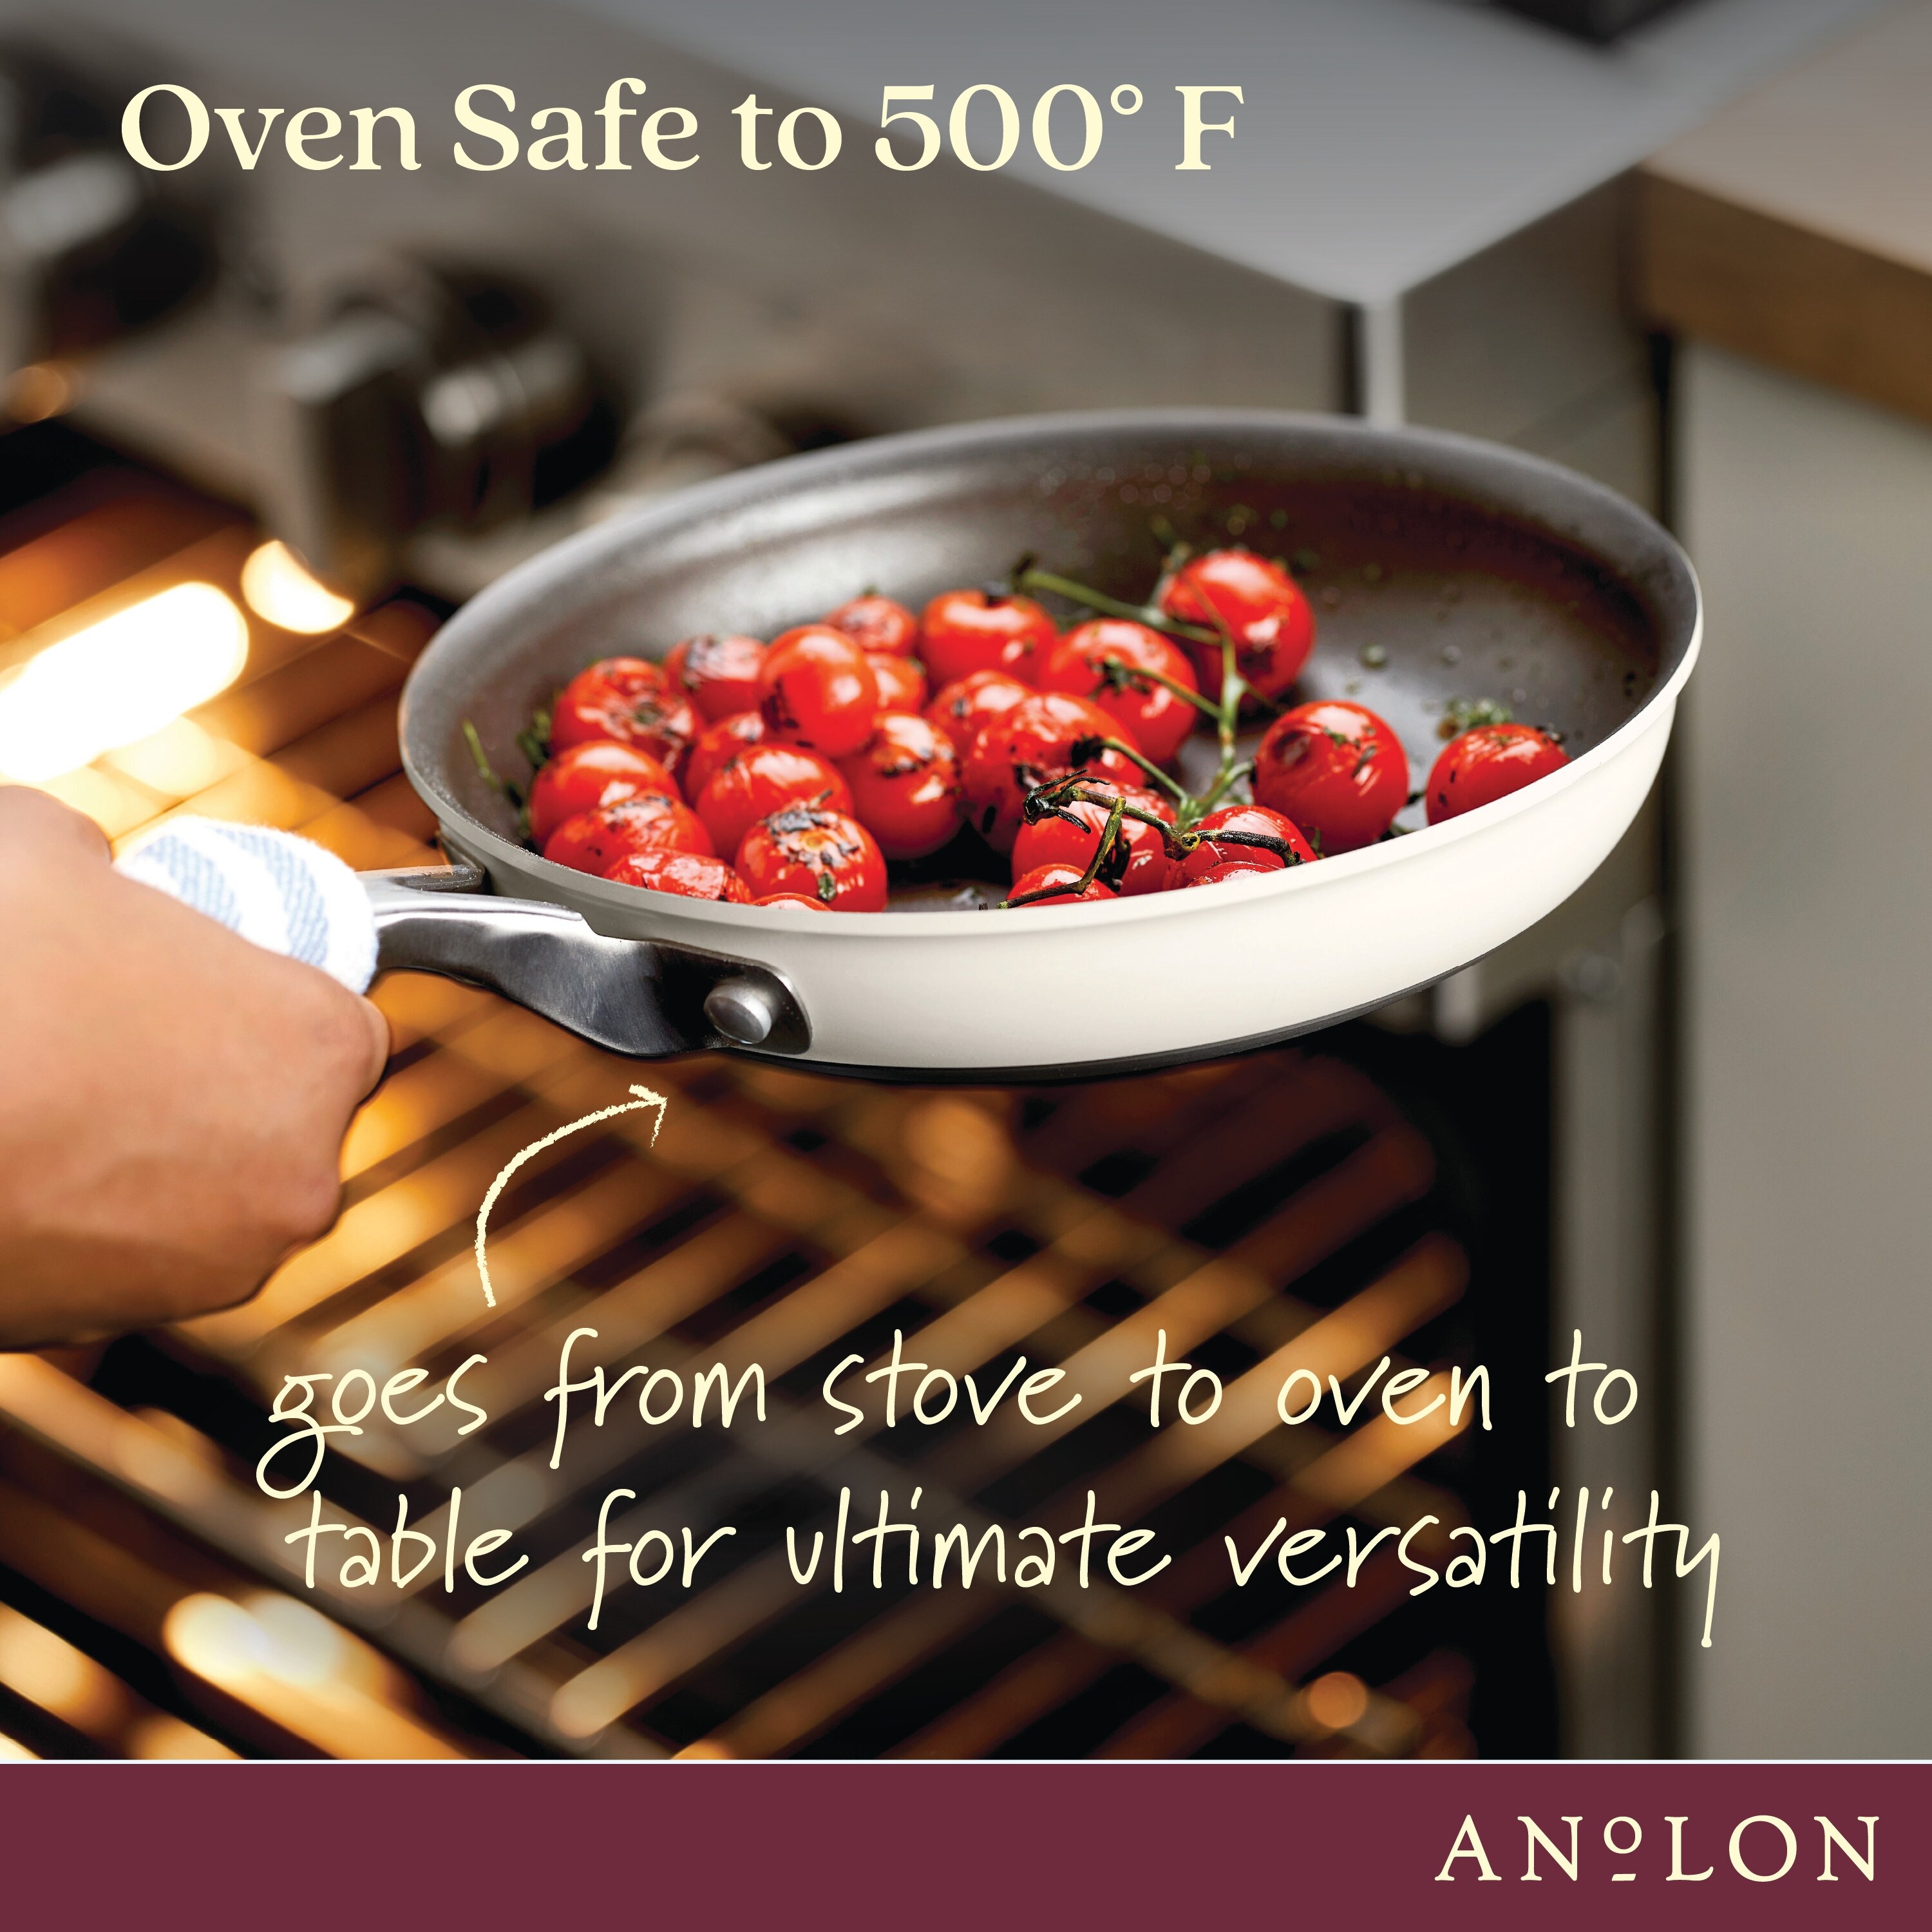 https://ak1.ostkcdn.com/images/products/is/images/direct/f7234c14756337ff96c1112030922b25e85d53cf/Anolon-Achieve-Hard-Anodized-Nonstick-Frying-Pan%2C-12-Inch.jpg